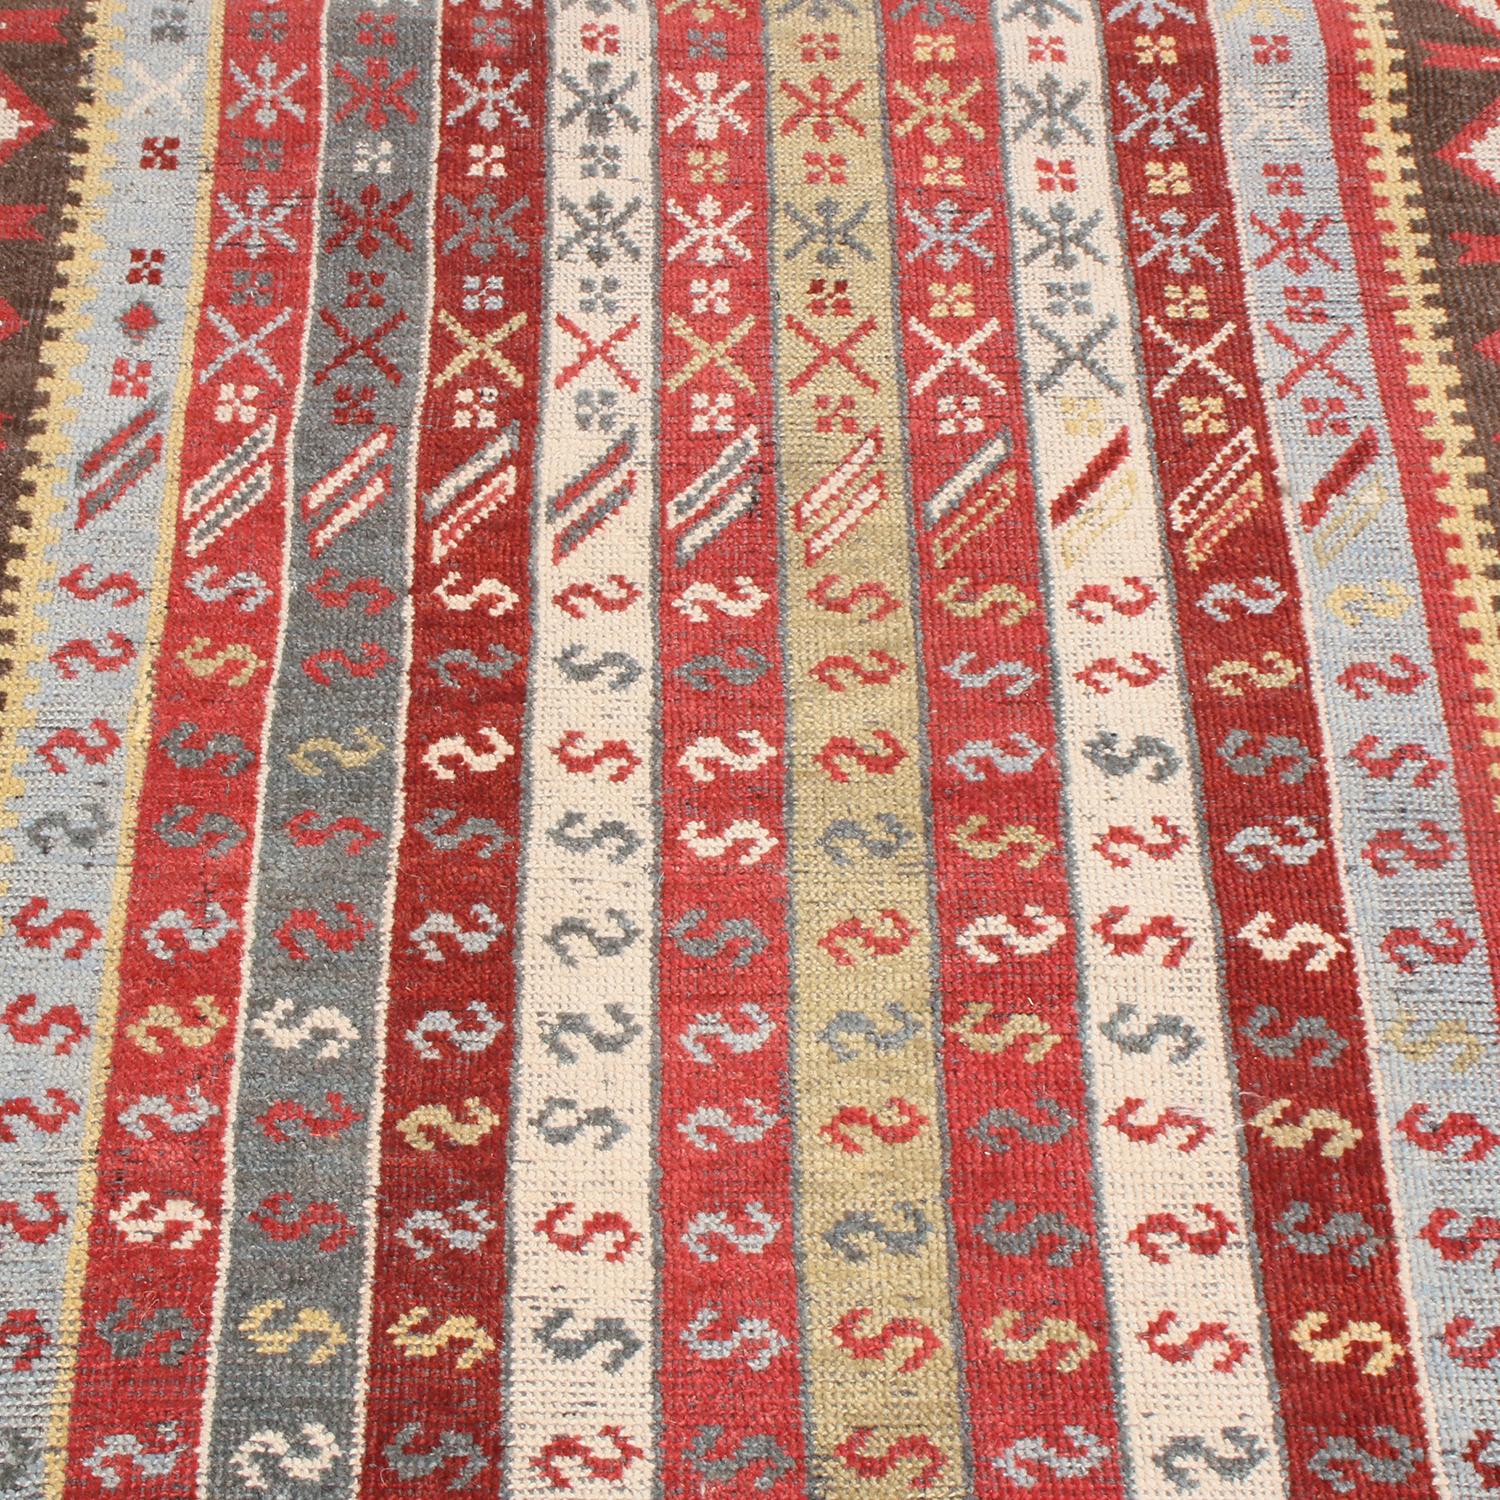 Indian Burano Burgundy Red and Blue Wool Runner Rug with Antique Hook Motifs